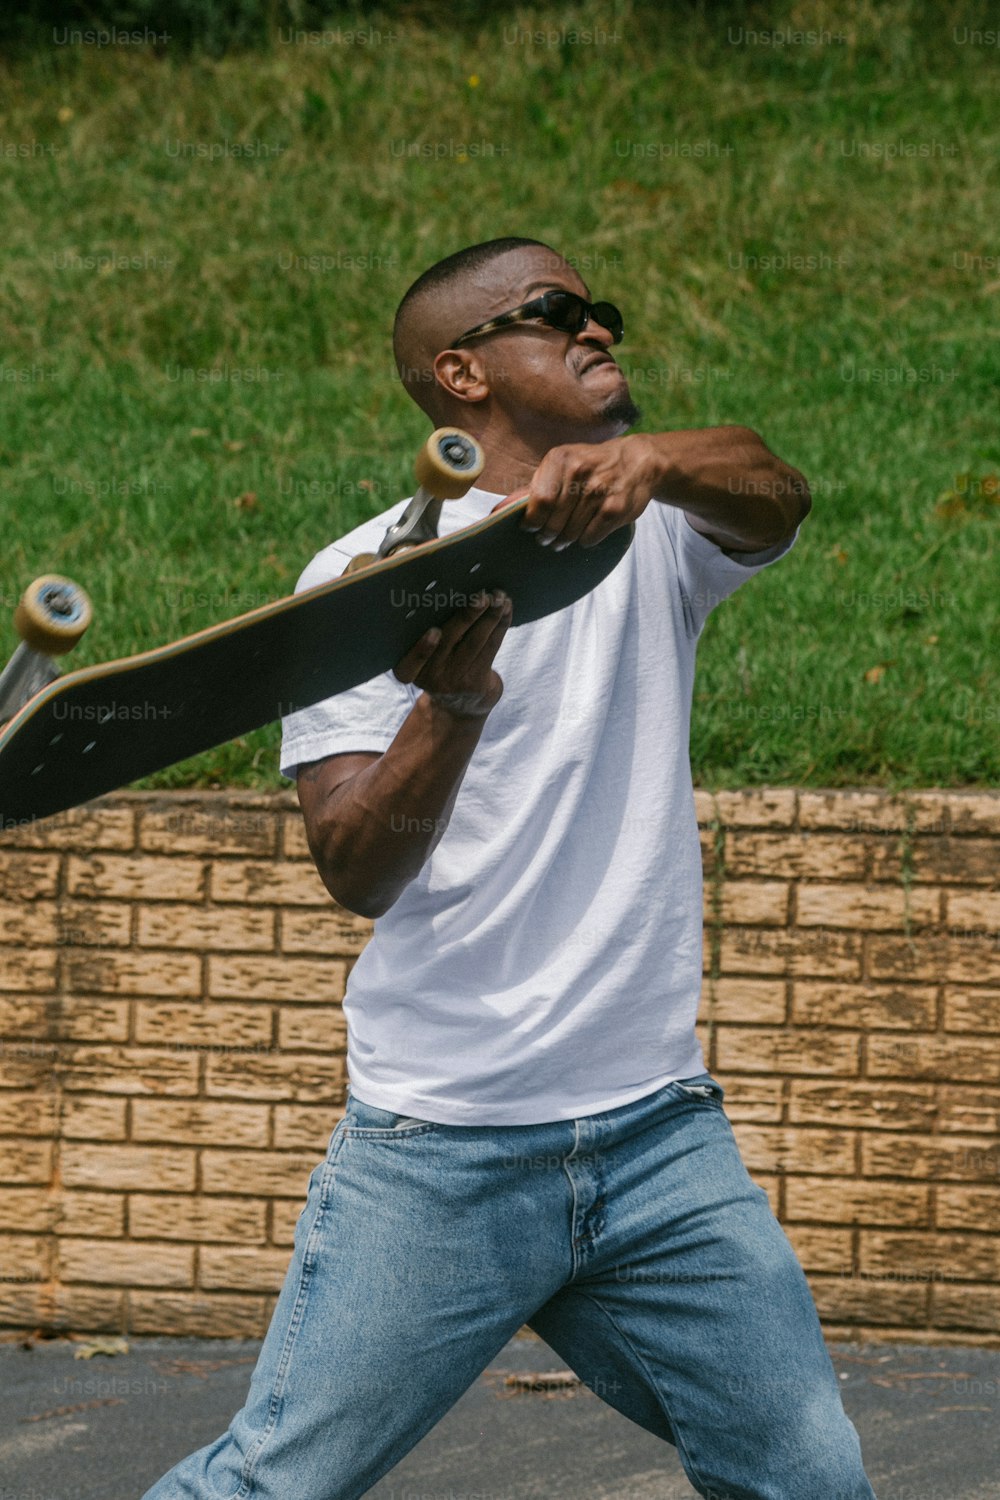 a man holding a skateboard in his right hand